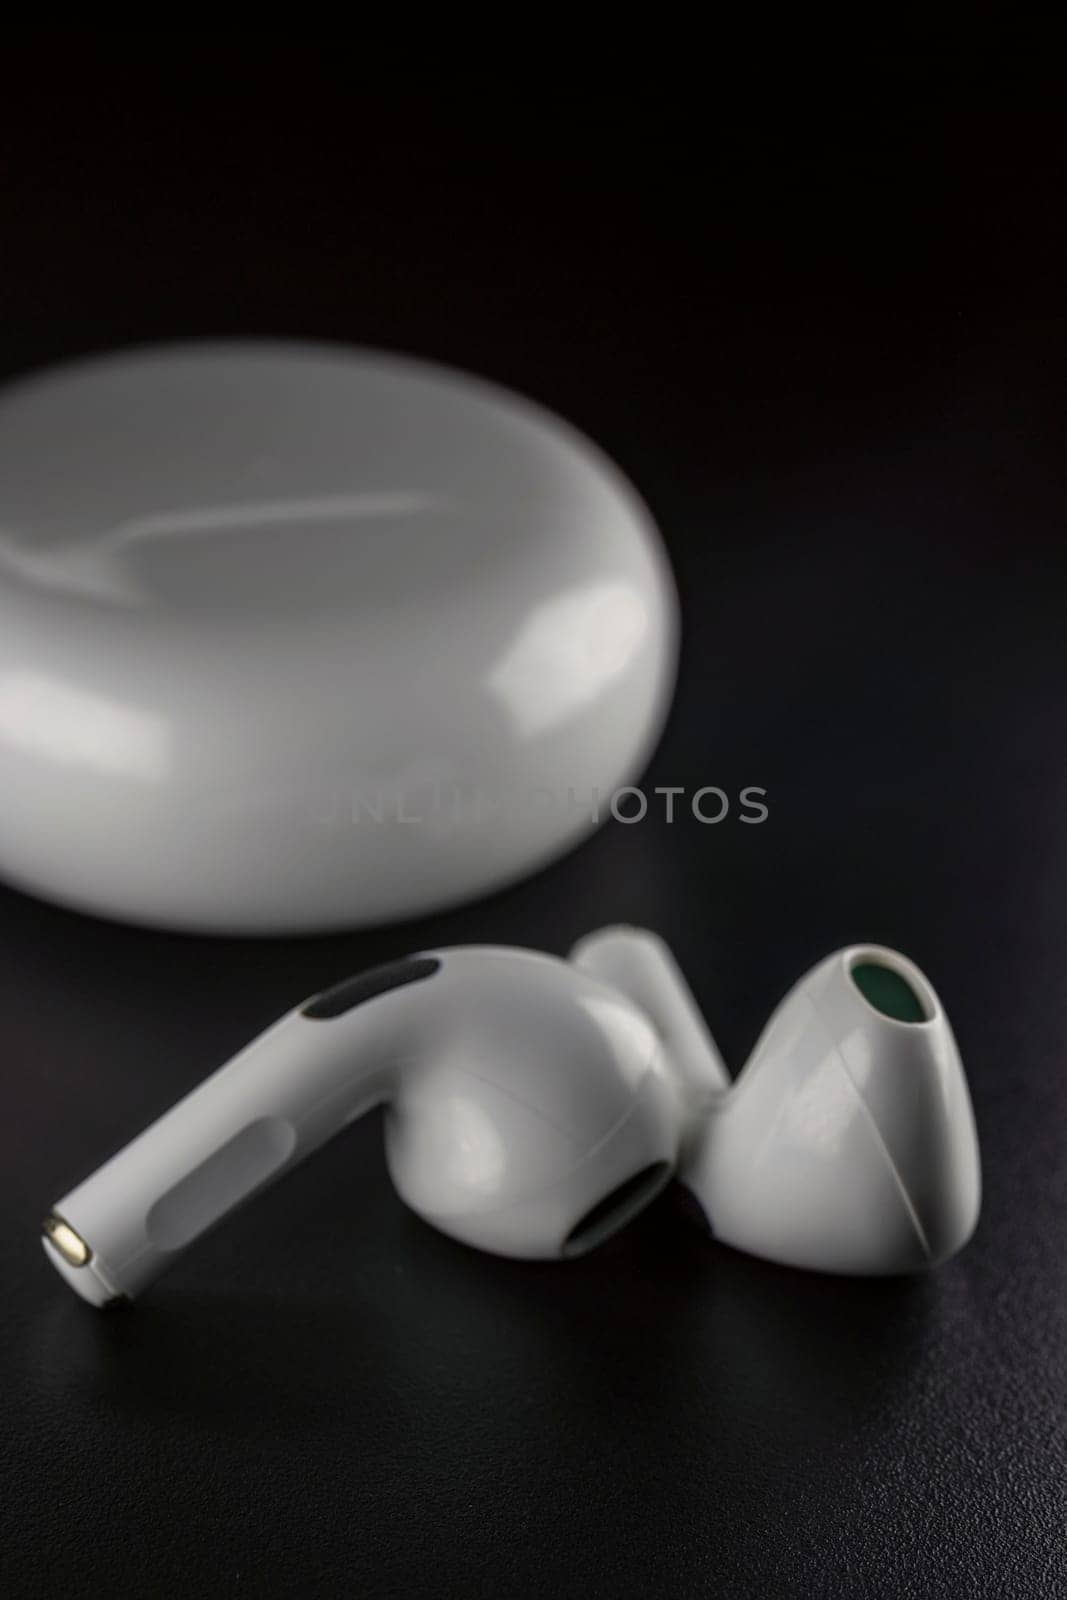 ROSTOV-ON-DON, RUSSIA - APRIL 28, 2018: Apple AirPods wireless Bluetooth headphones and charging case for Apple iPhone. New Apple Earpods Airpods in box. by zokov